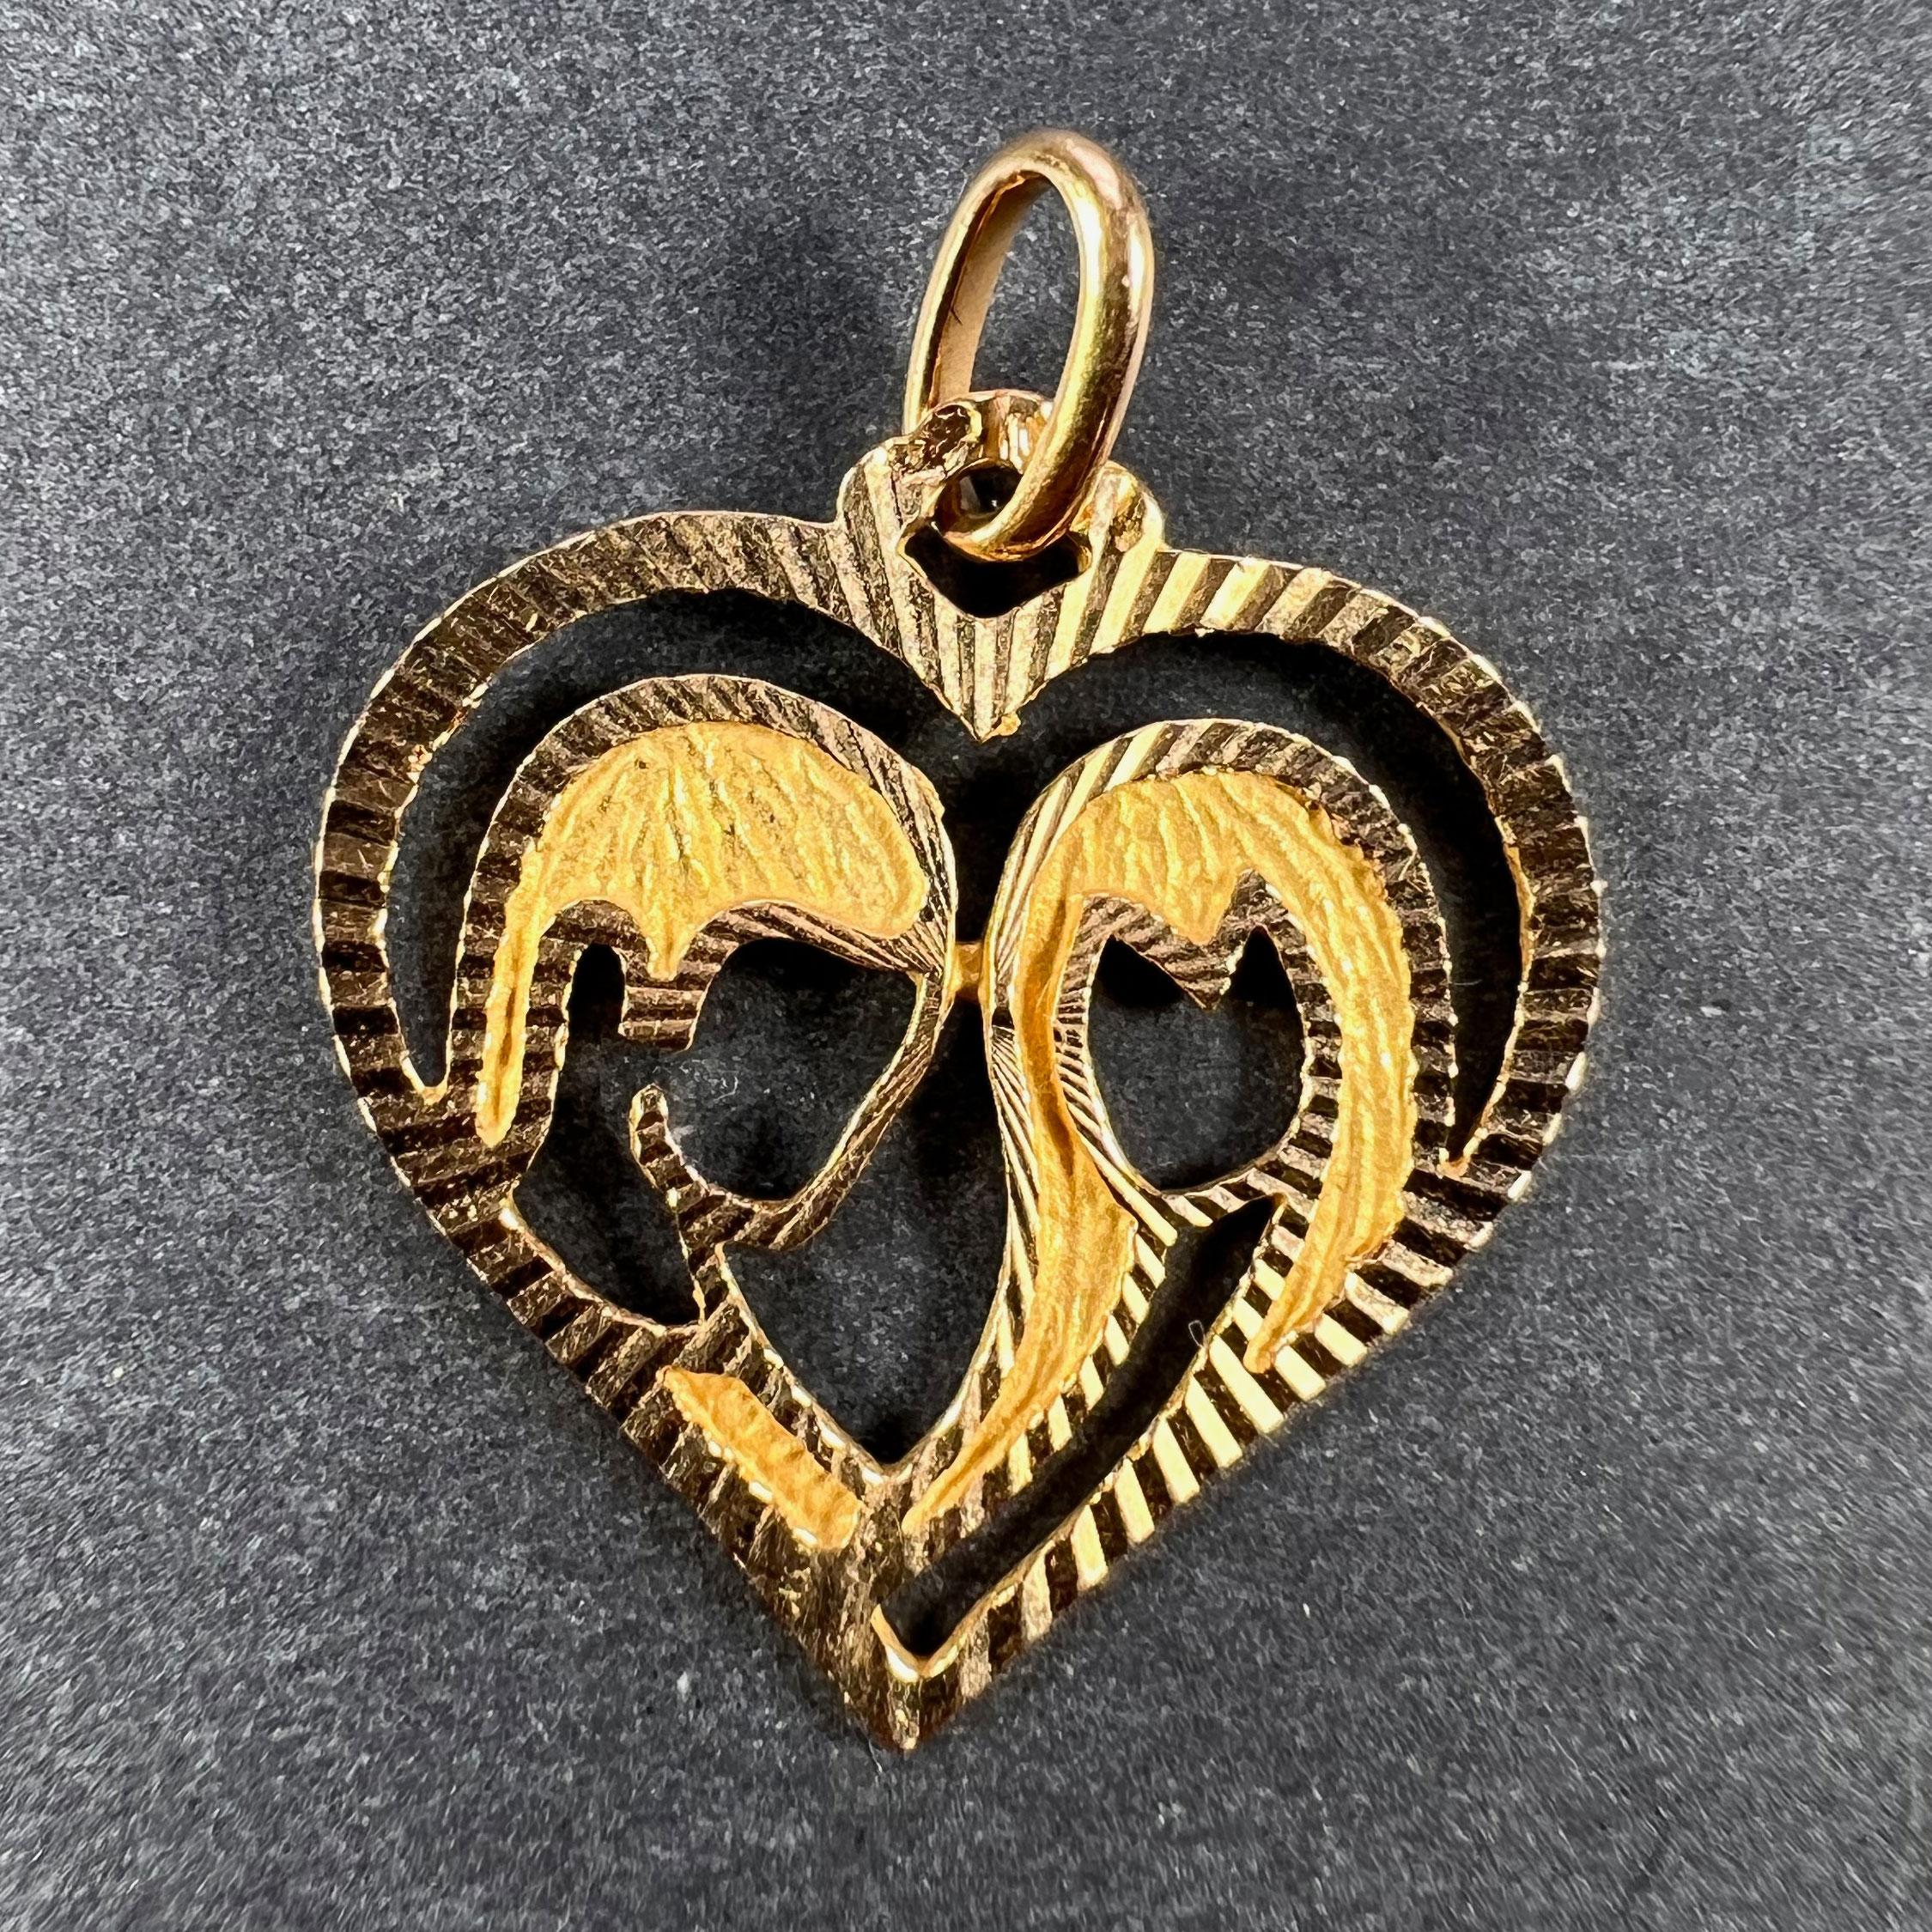 An 18 karat (18K) yellow gold charm pendant designed as an open love heart with a pair of lovers inside. Stamped with the eagle's head for 18 karat gold and French manufacture, along with an unknown maker's mark.

Dimensions: 1.9 x 1.8 x 0.1 cm (not